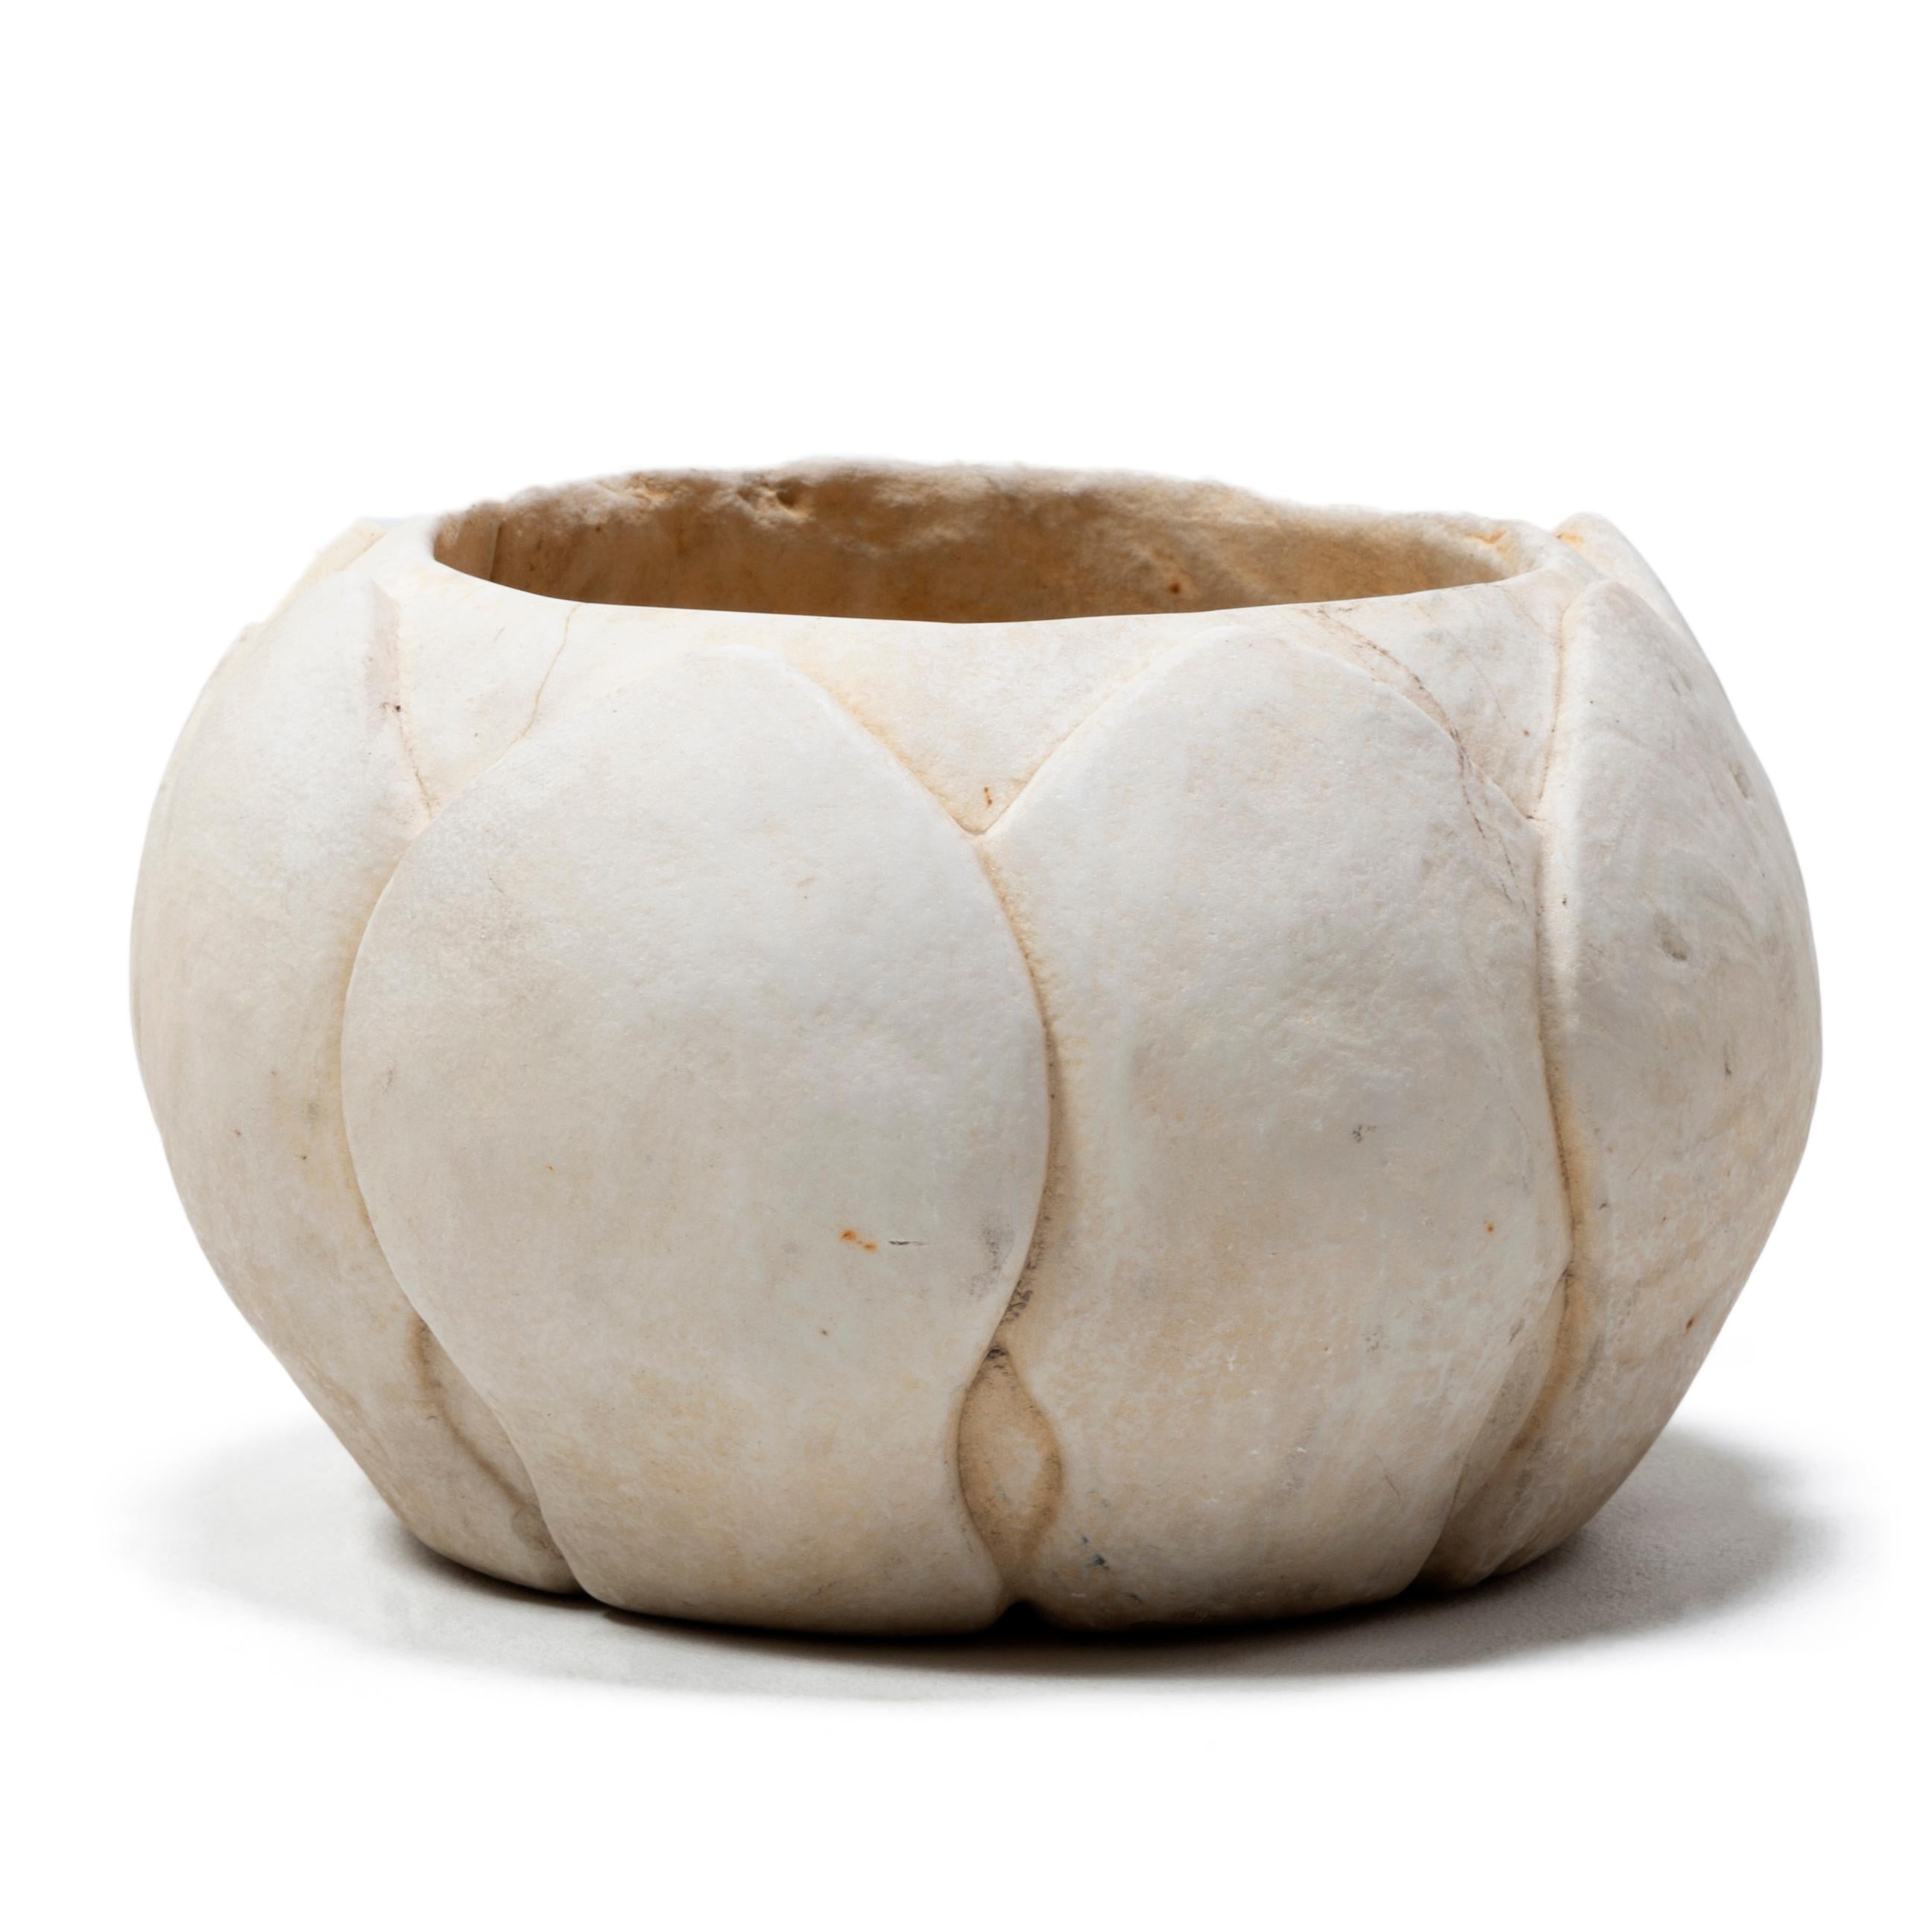 This 20th century basin was hand carved from solid marble into the form of a blossoming lotus flower. Emerging from the mud of riverbanks yet pristine and beautiful, the lotus plant is a symbol of purity and perfection, and is considered a sacred